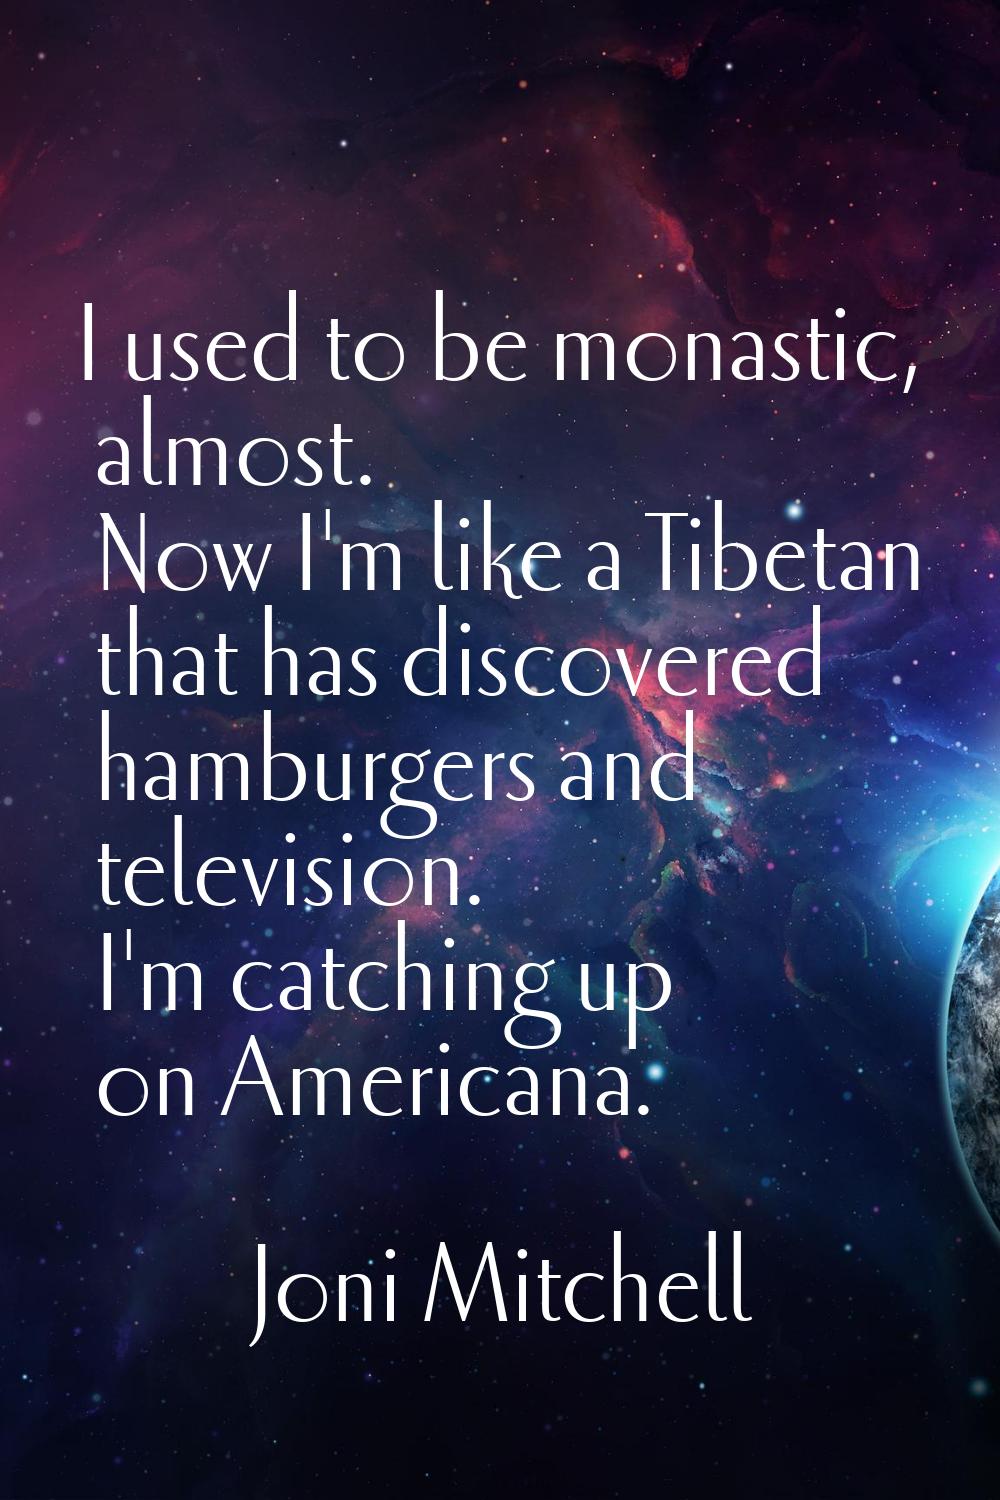 I used to be monastic, almost. Now I'm like a Tibetan that has discovered hamburgers and television